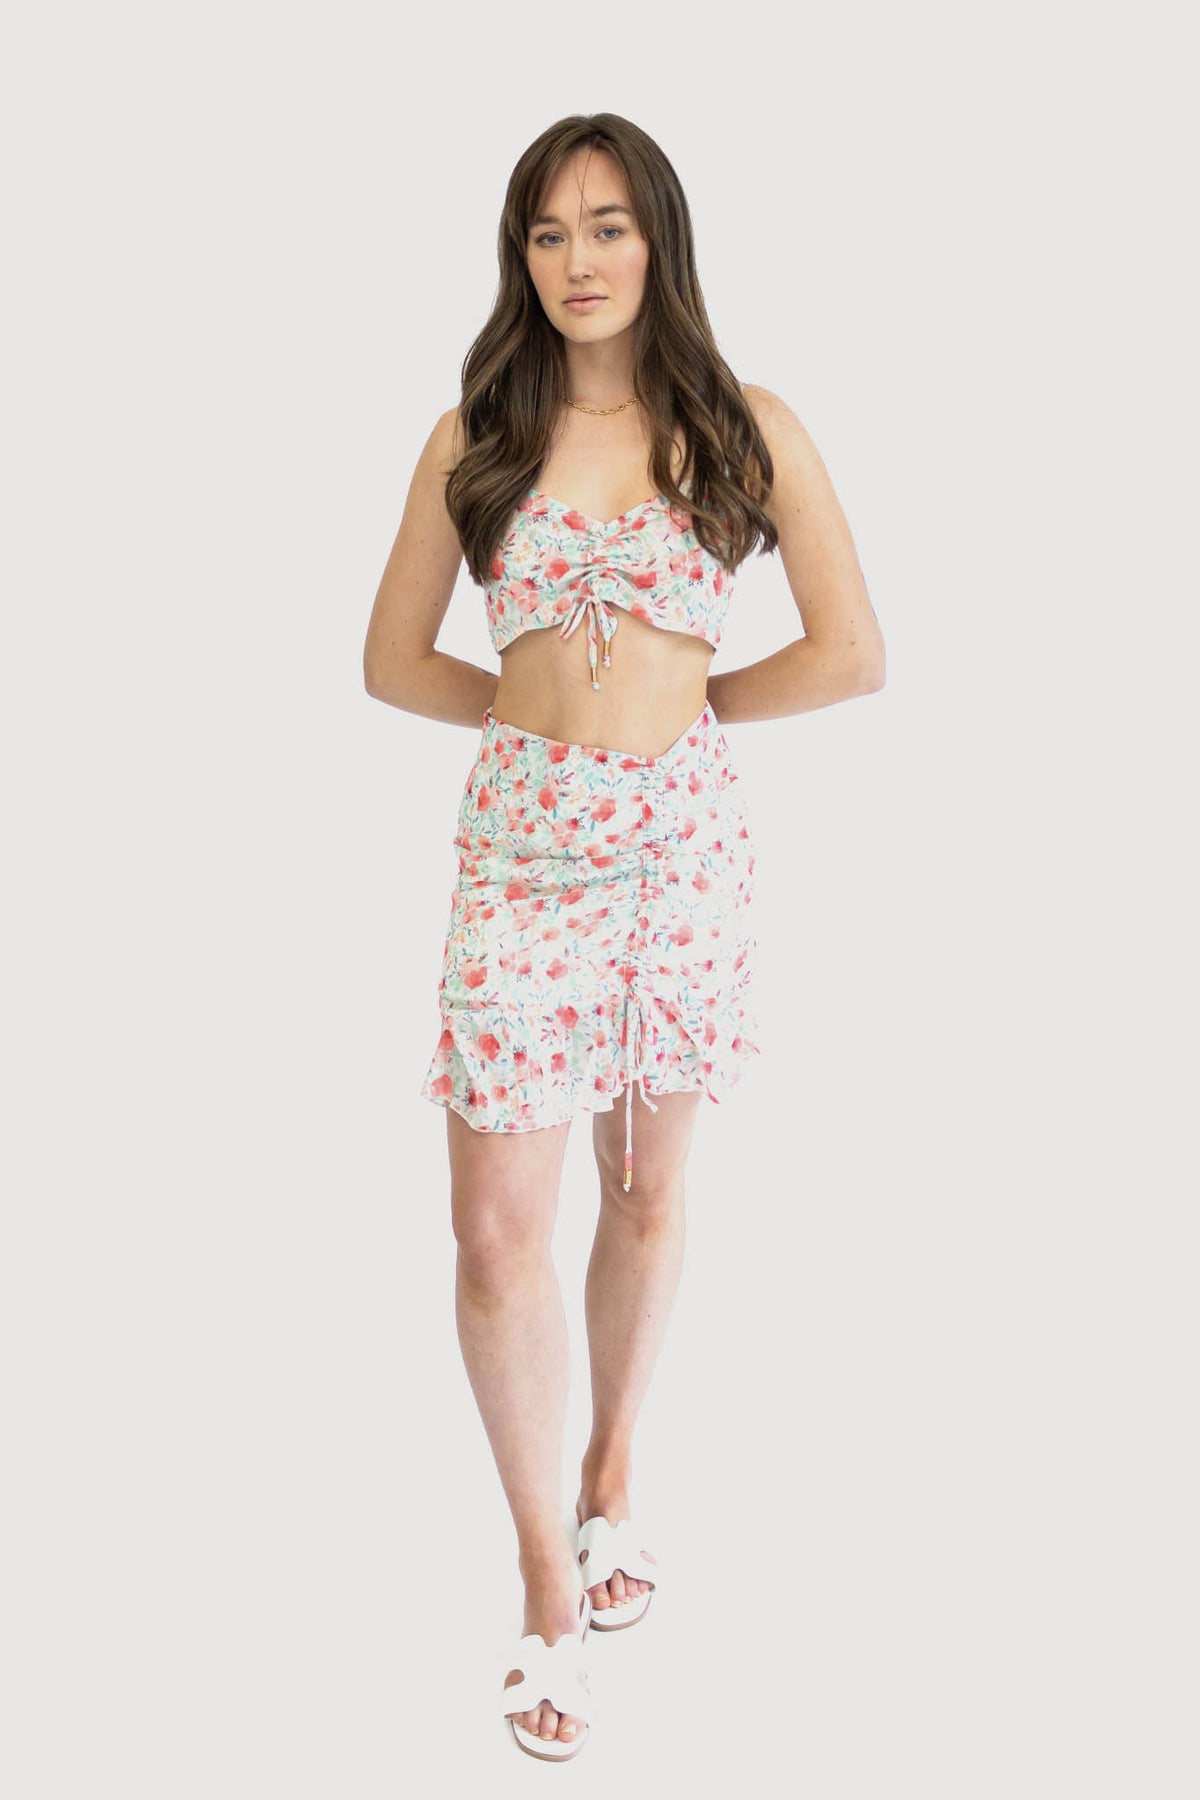 Model wearing a floral ruched crop top with adjustable spaghetti straps and a matching high-waisted skirt with a ruffled hem. Coral peonies.